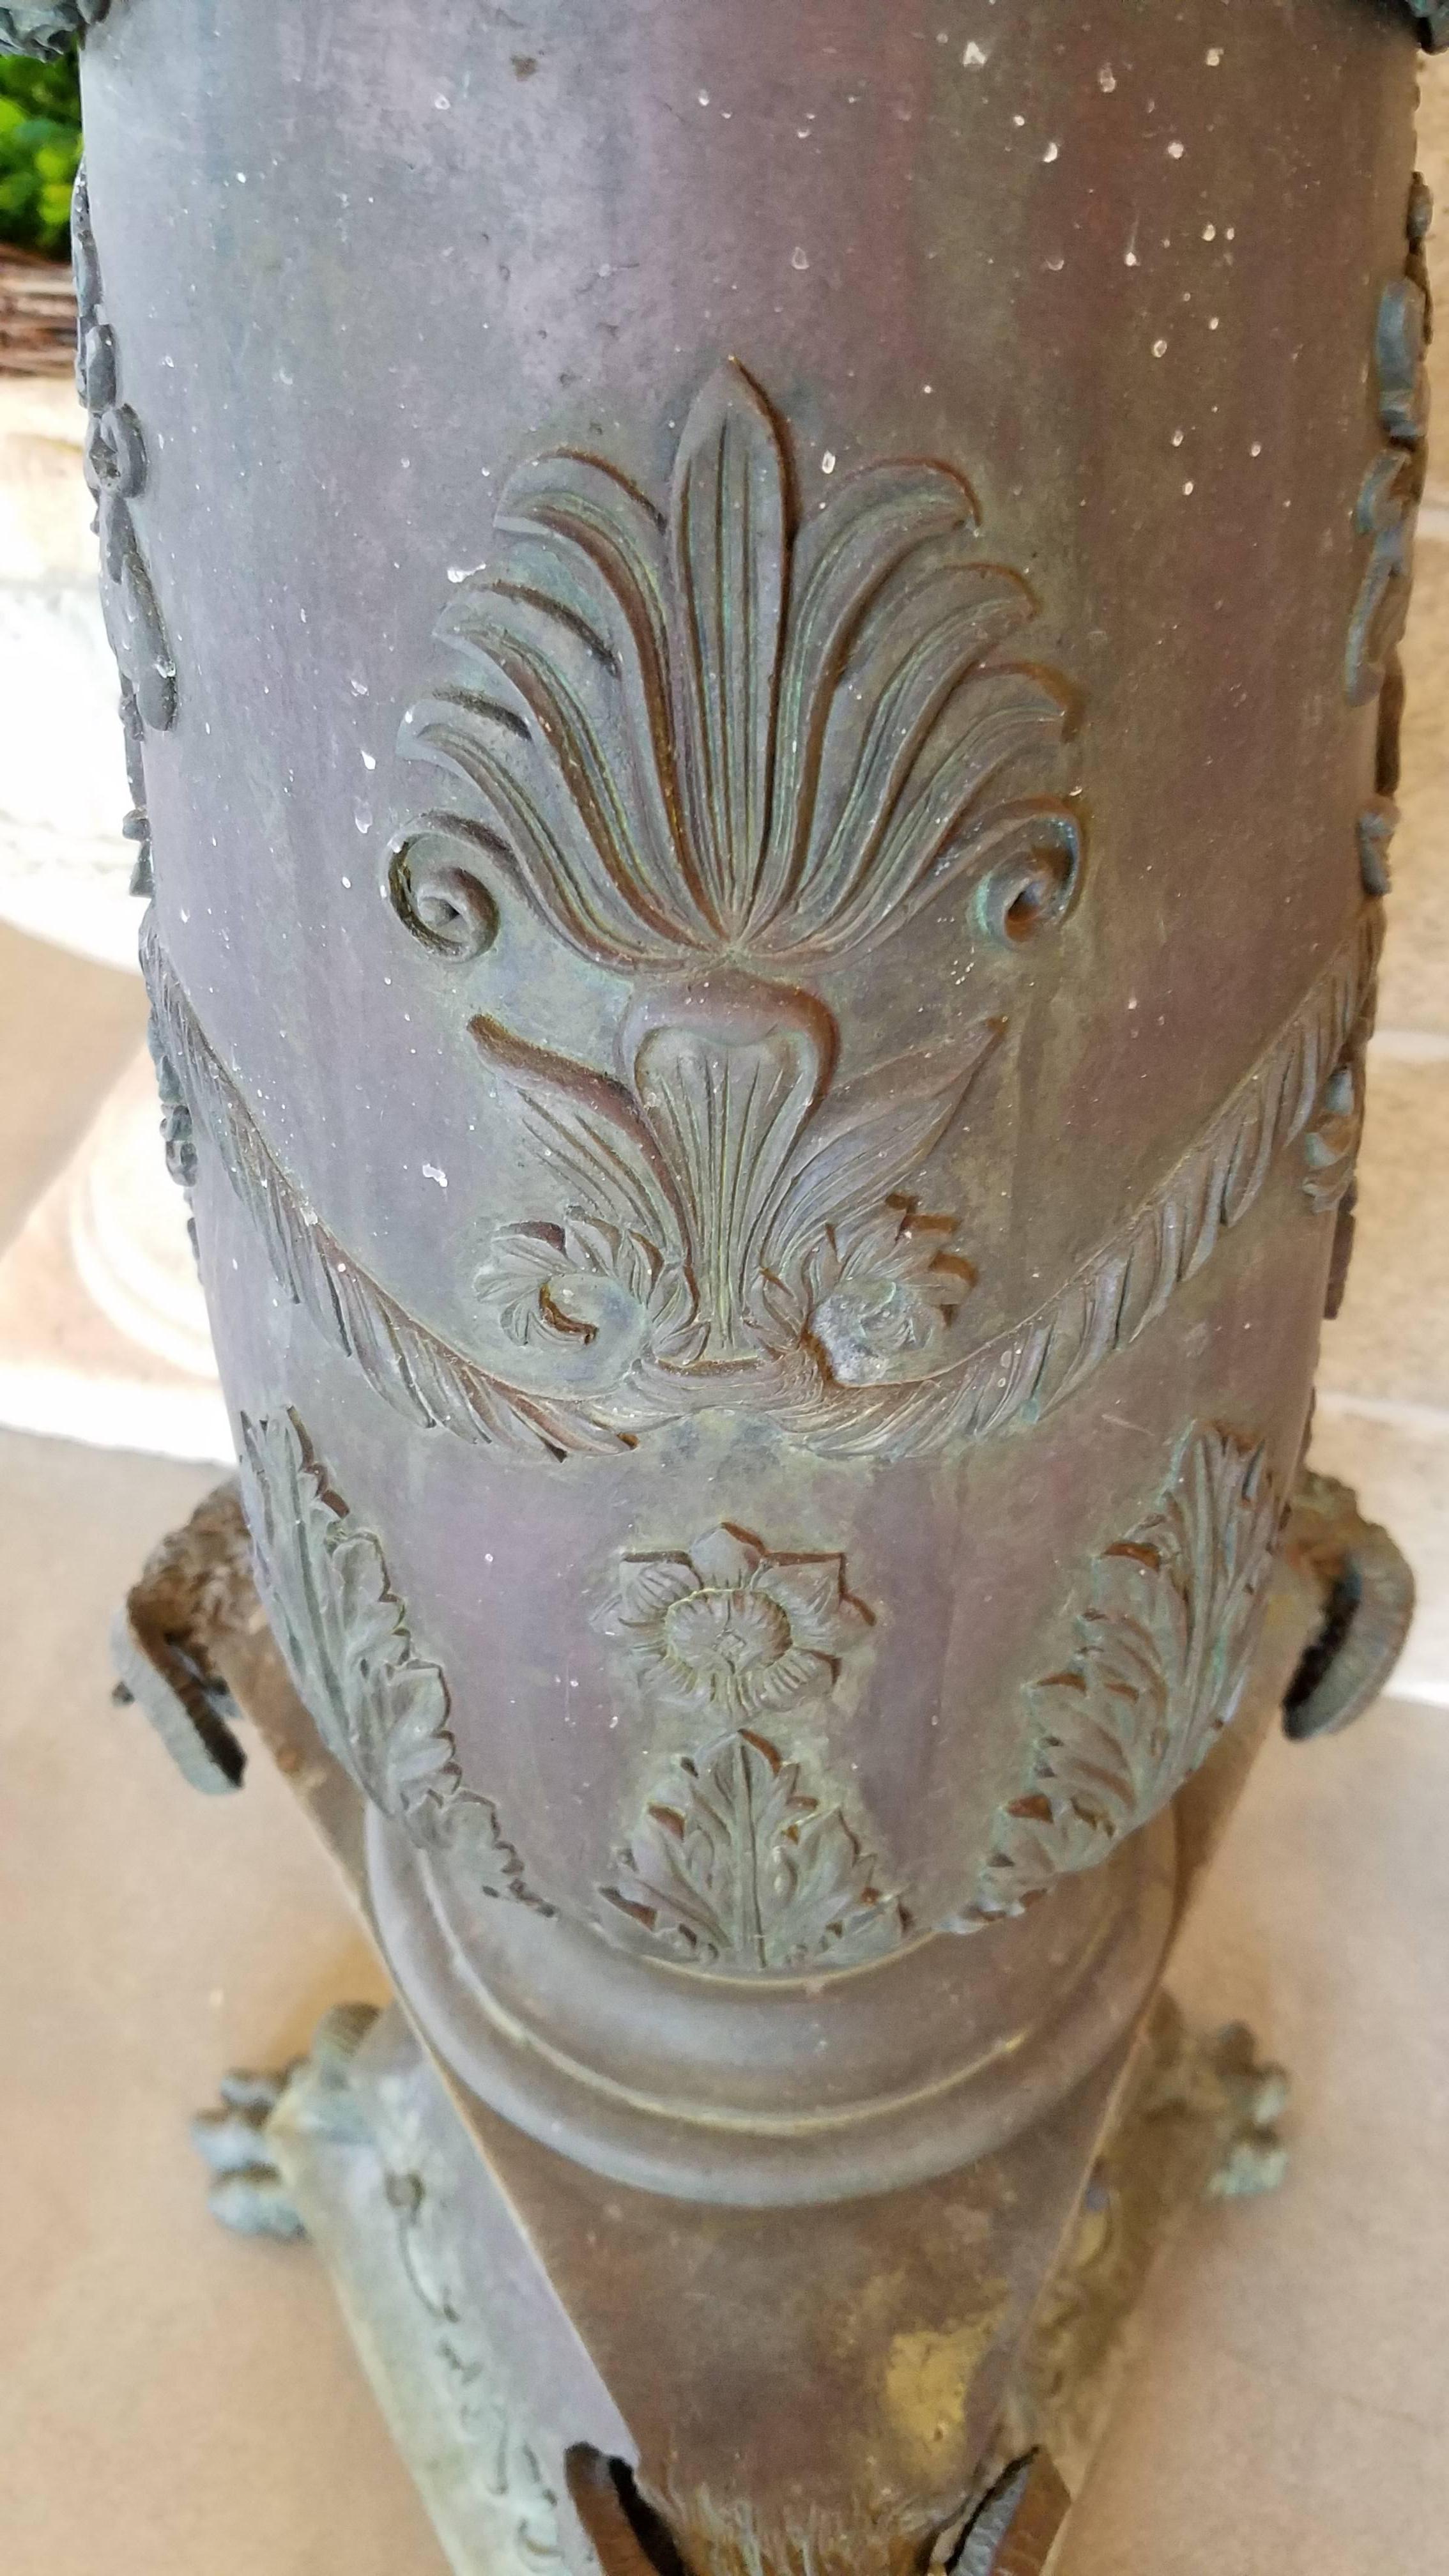 This impressive Antique Birdbath Garden Urn is adorned with ram's heads, sphinx, putti and paw feet with scrolling, acanthus and floral detail and is a very generous size to be a statement in any room.